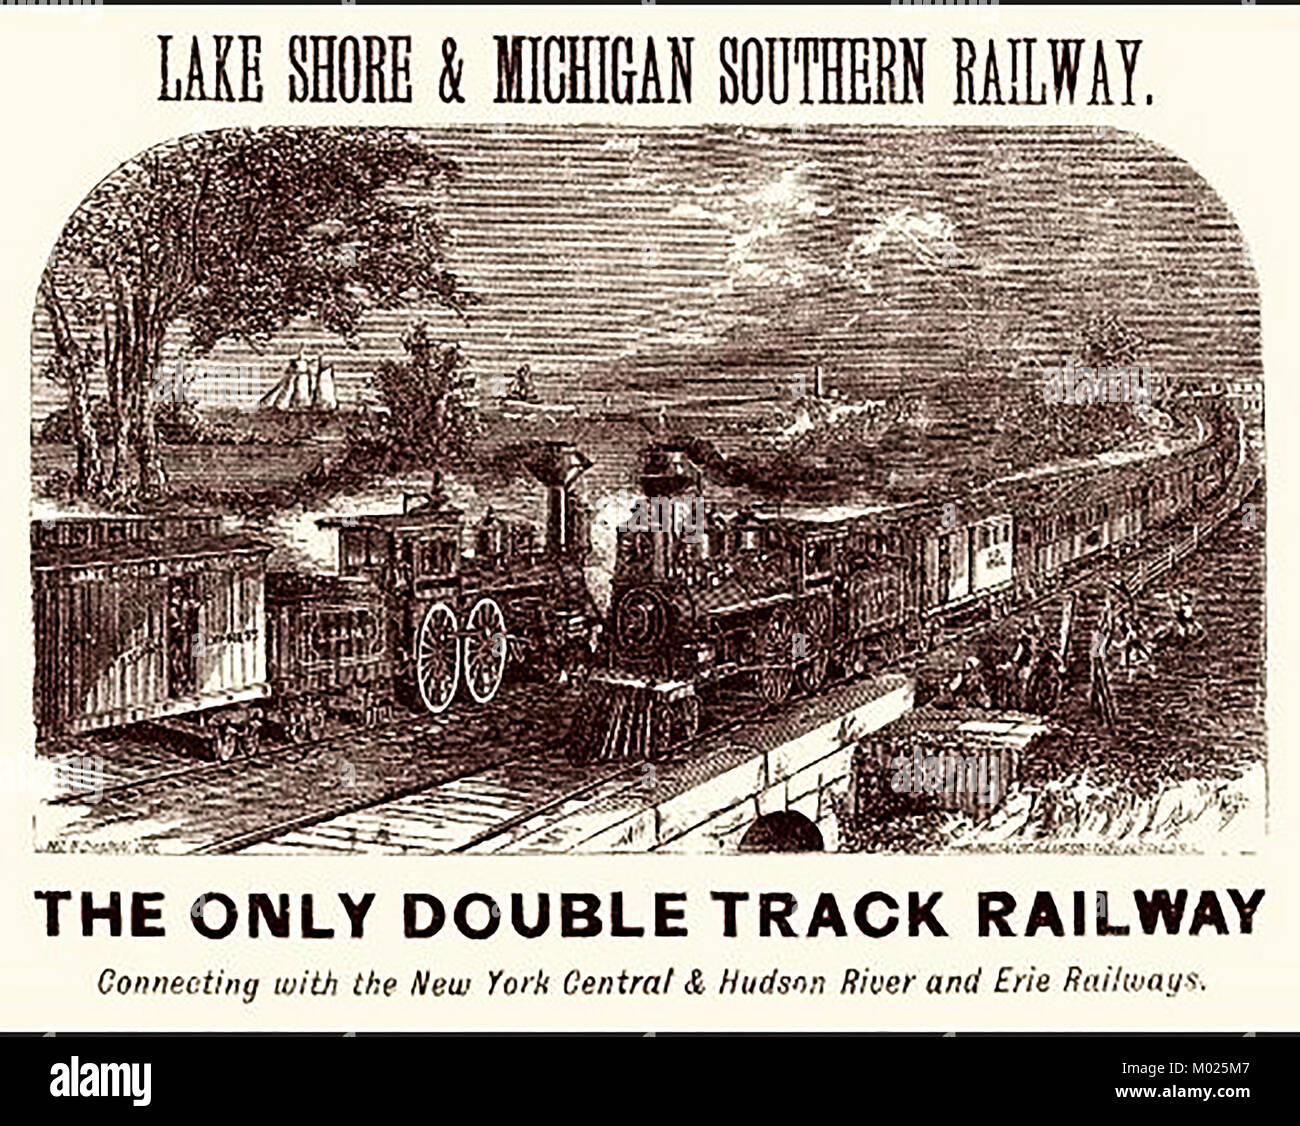 Lake Shore and Michigan Southern Railway 1876  - USA  - Advertisement showing trains on the double track  1876 Stock Photo